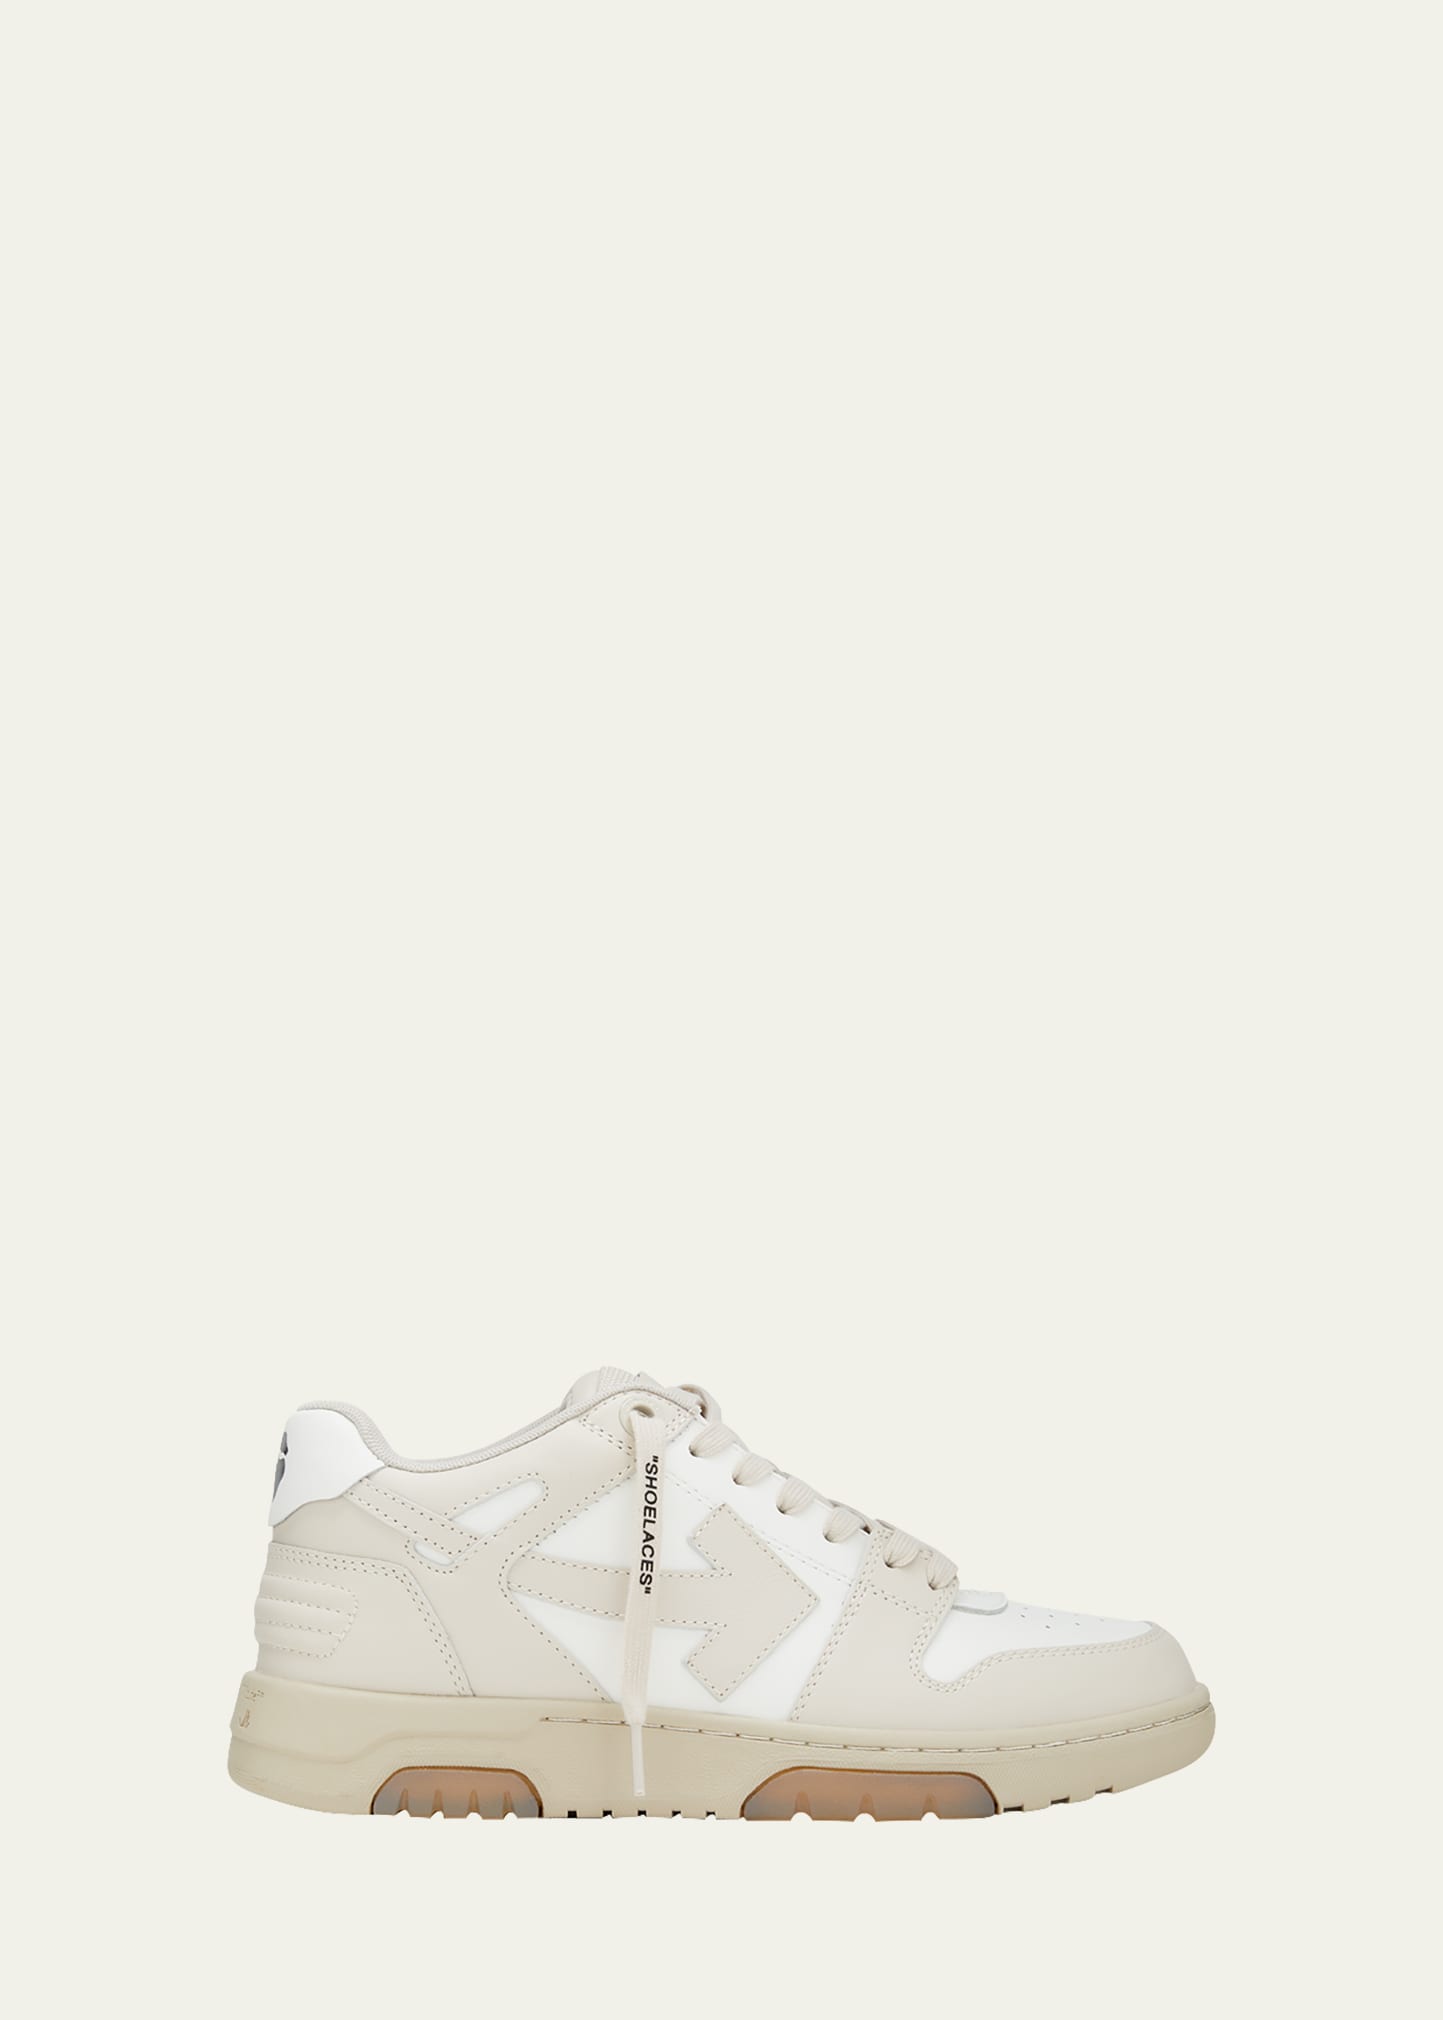 OFF-WHITE OUT OF OFFICE BICOLOR SNEAKERS